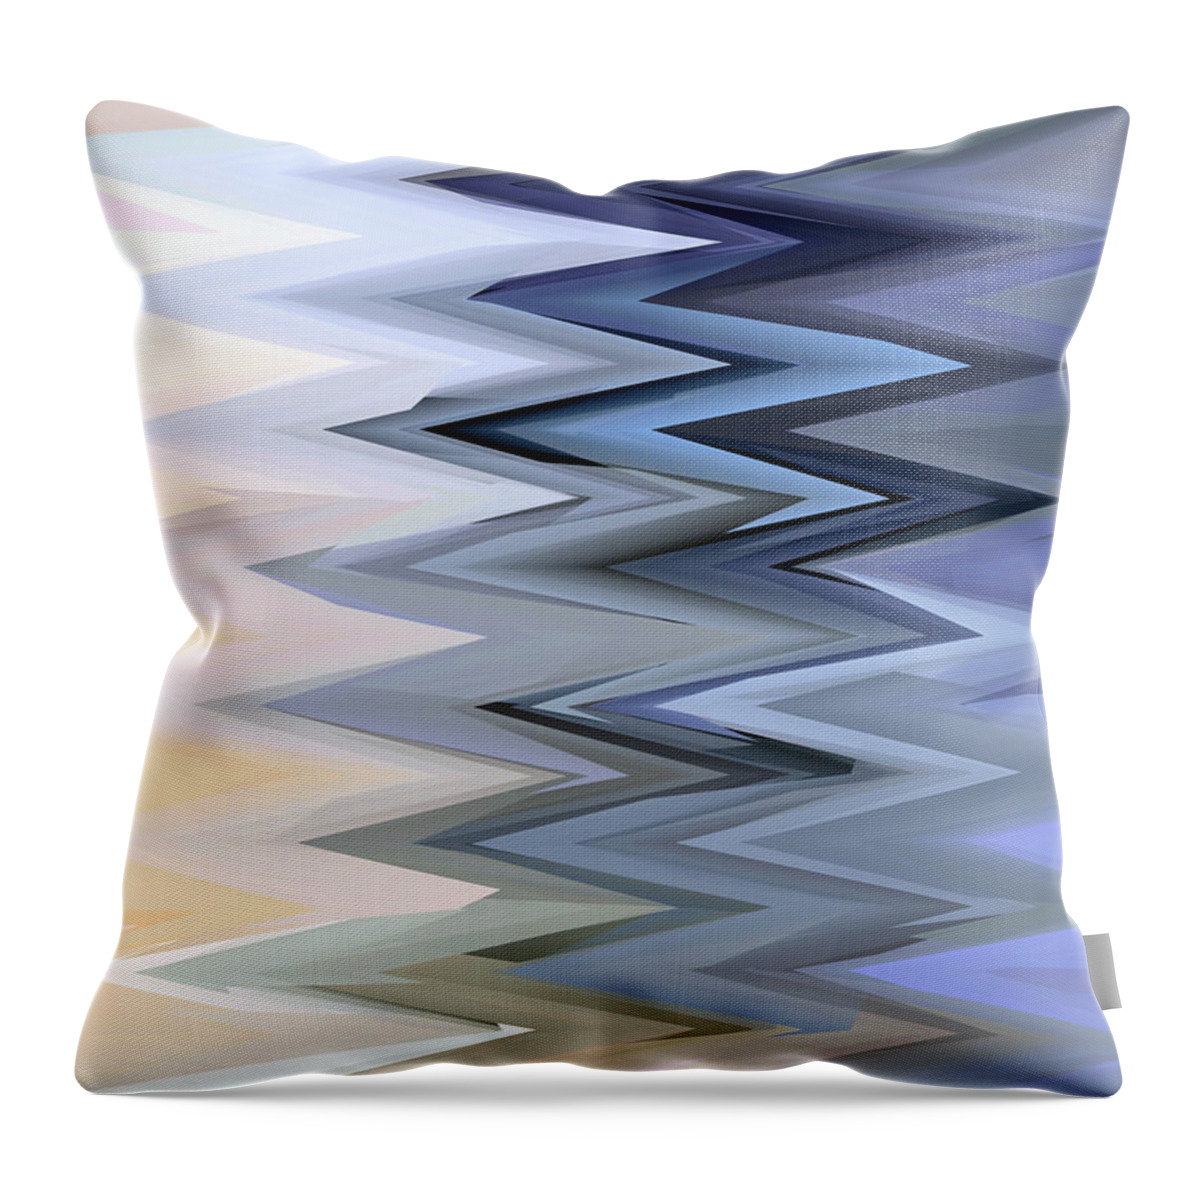 Background Throw Pillow featuring the digital art Zig Zag 1 by Chris Butler